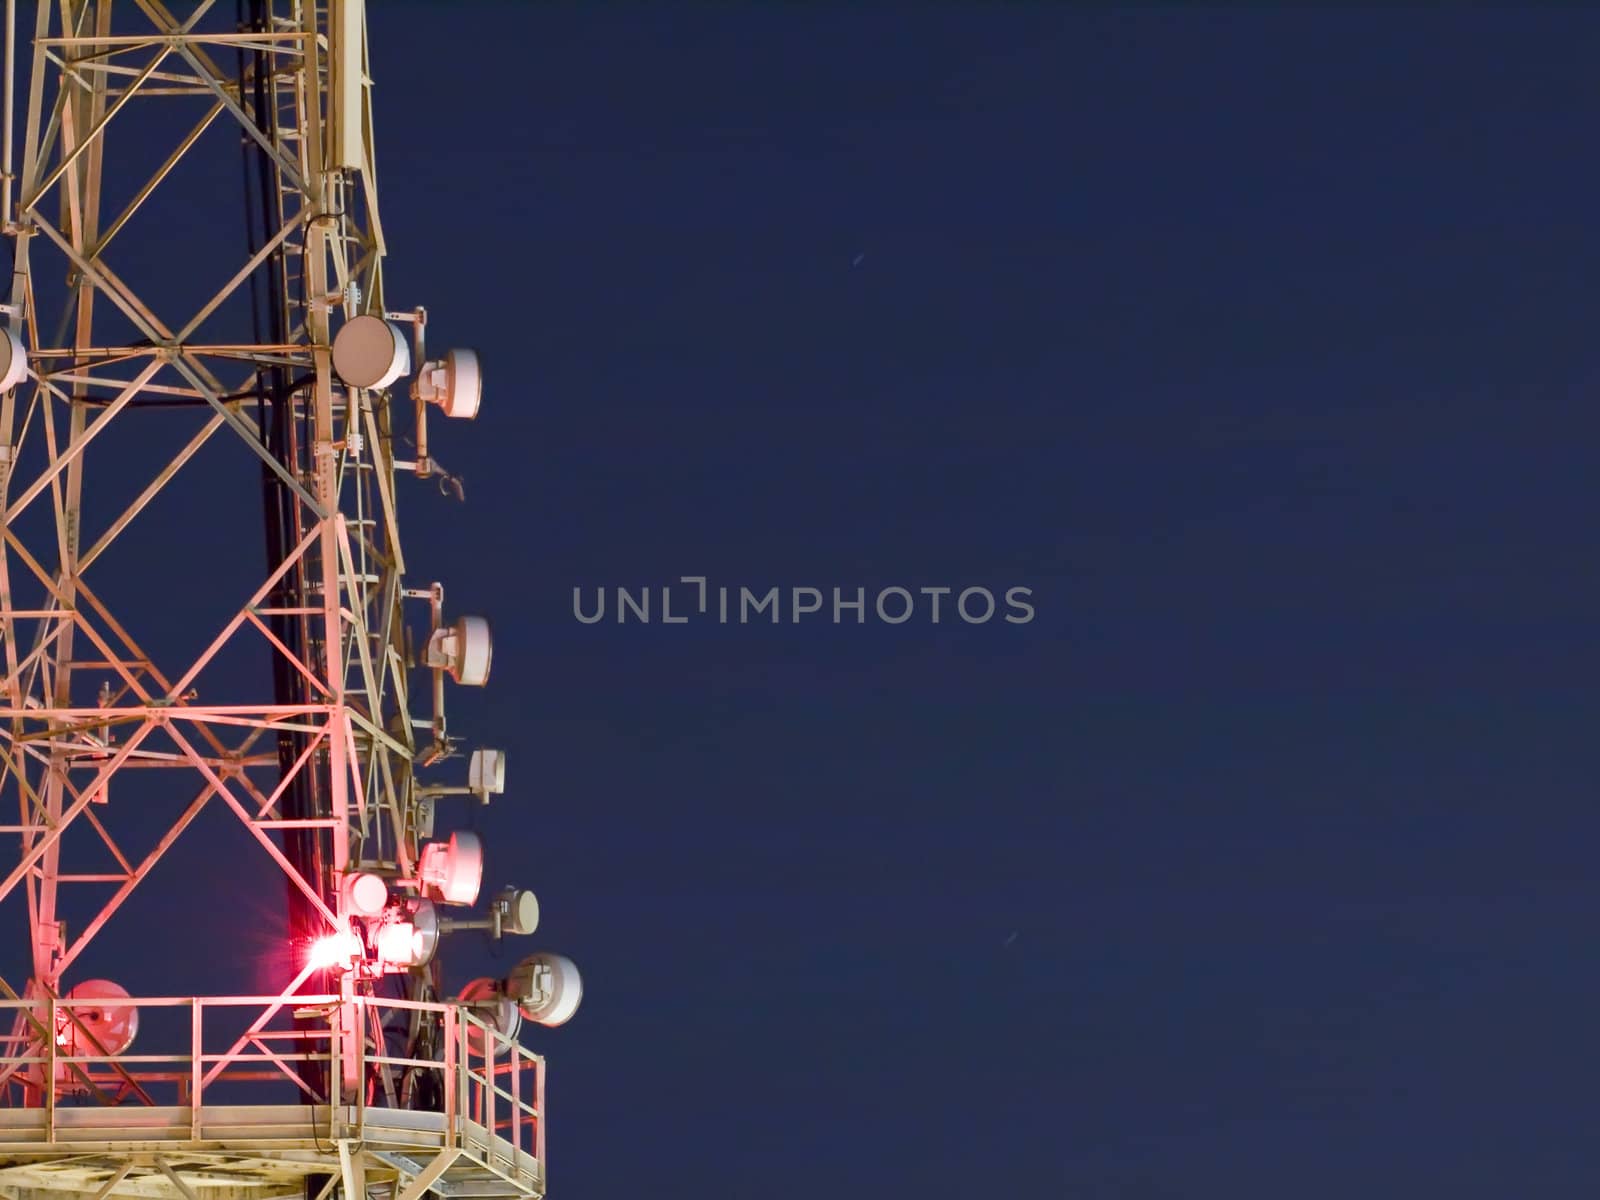 Antenna at Night by PhotoWorks